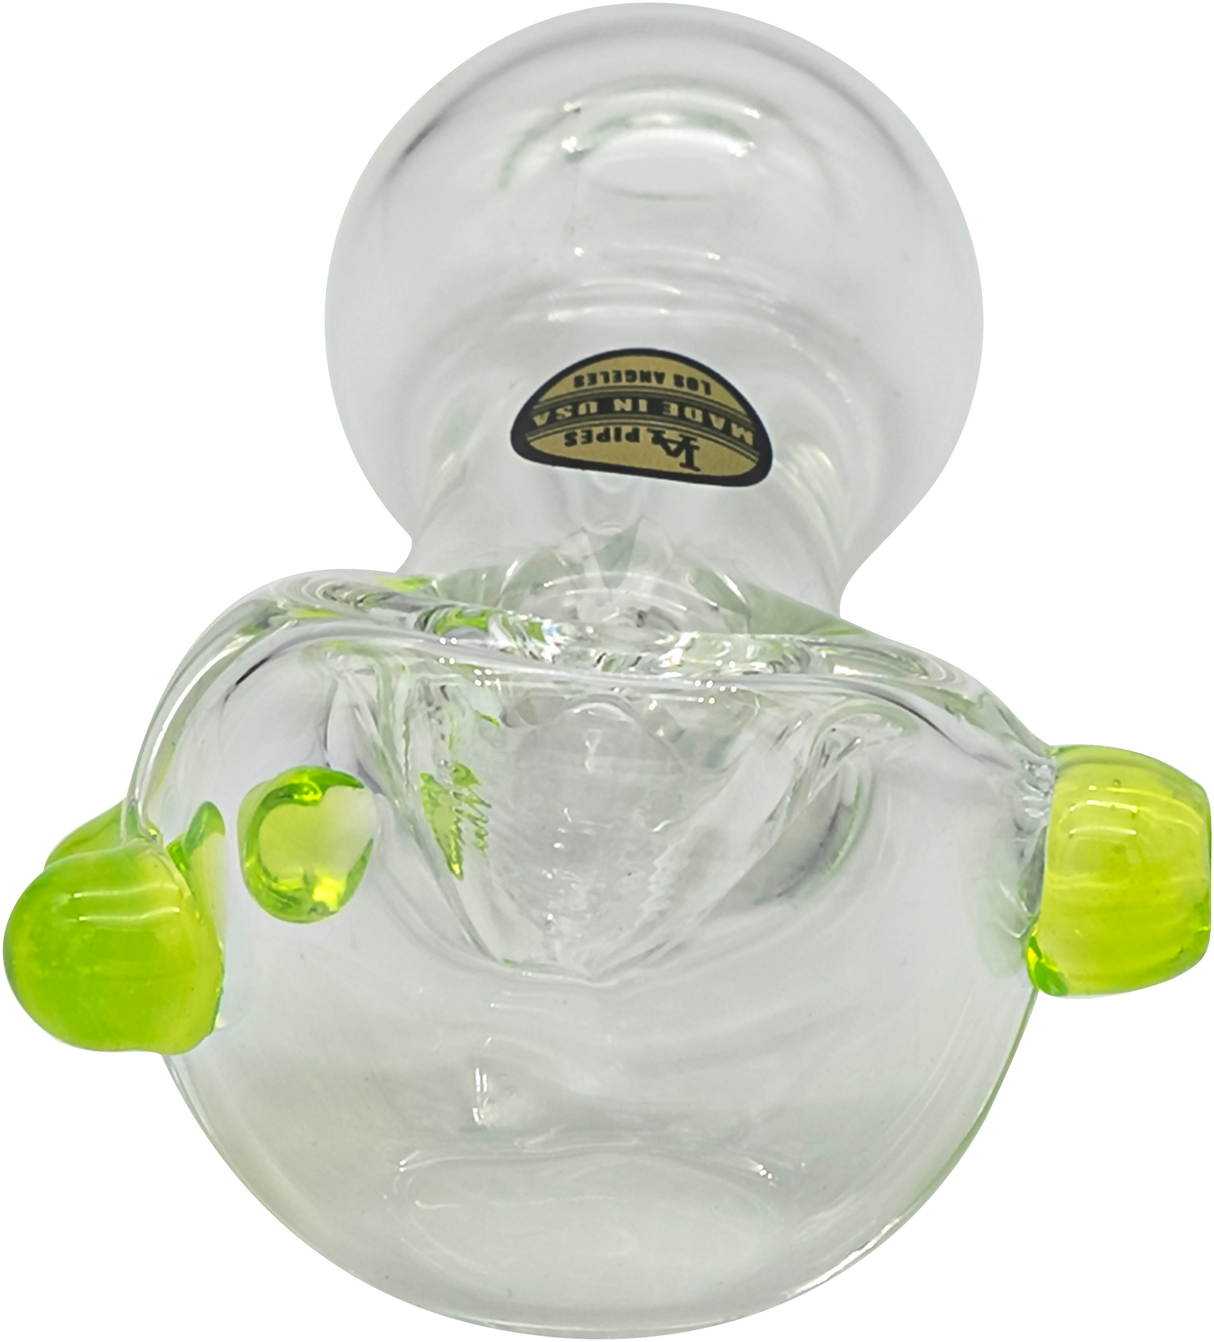 LA Pipes Thick Glass Spoon Pipe with Neon Accents - Top View, 4" Borosilicate